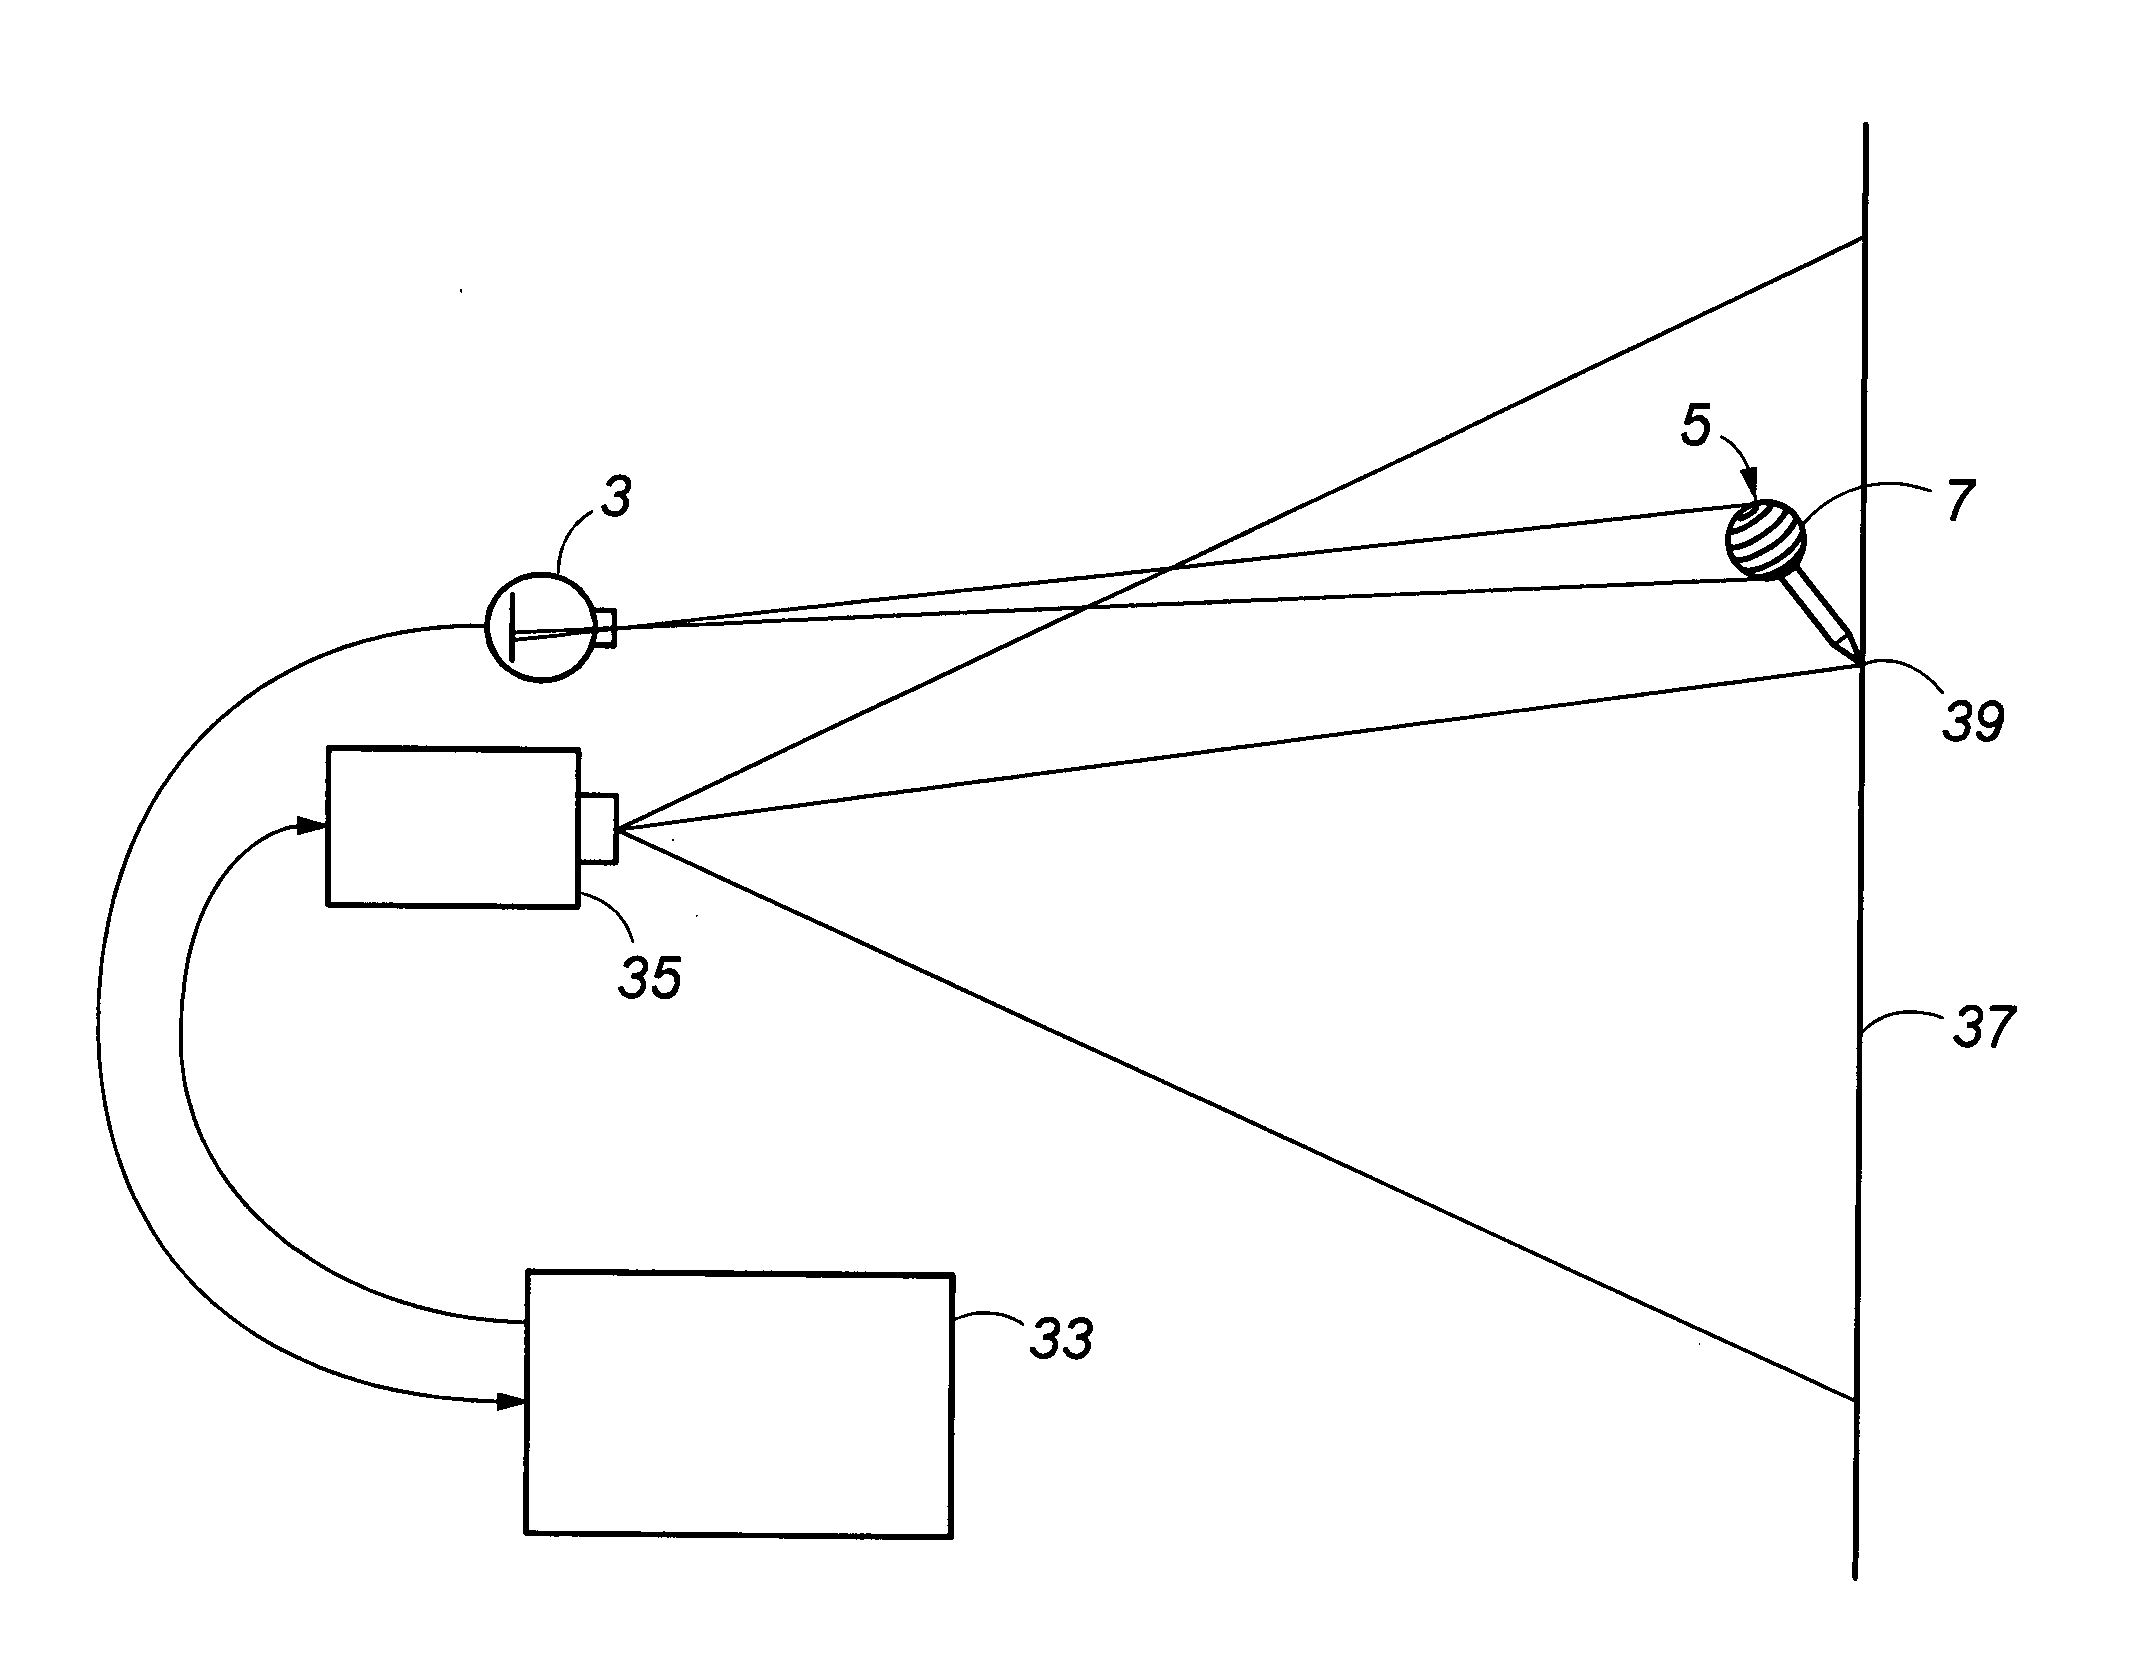 Object position and orientation detection system